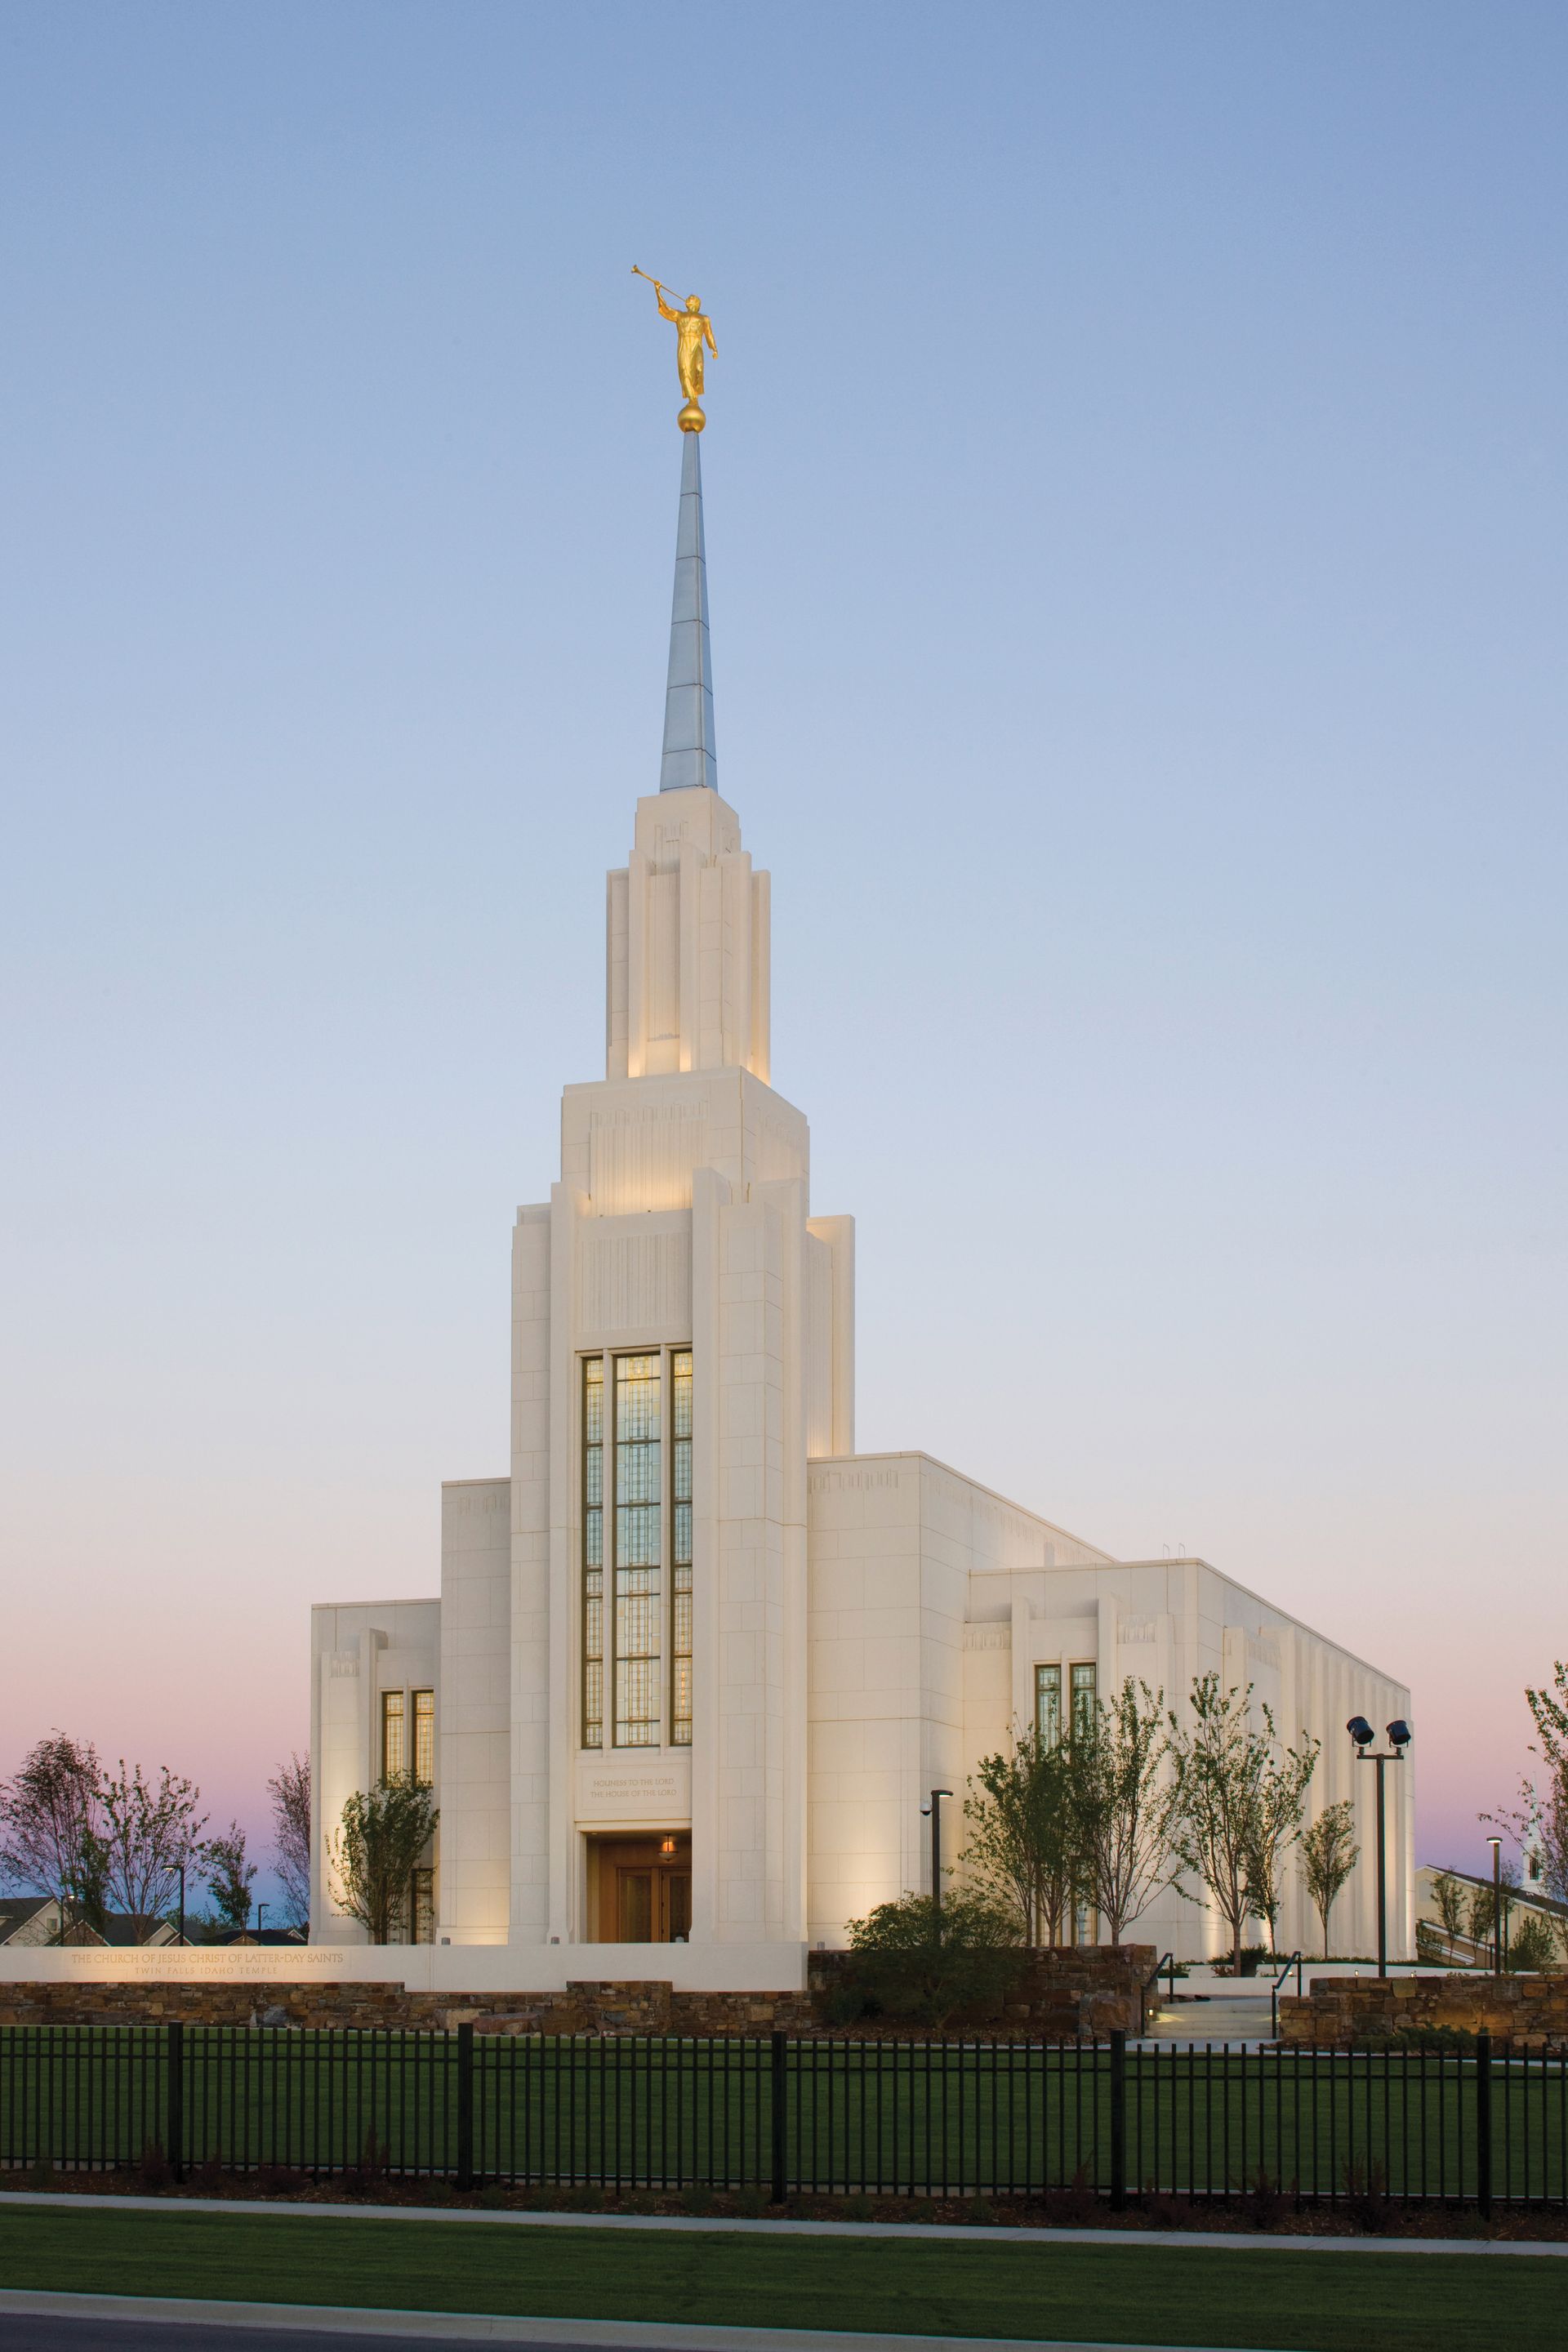 The Twin Falls Idaho Temple in the evening, with the entrance and scenery.